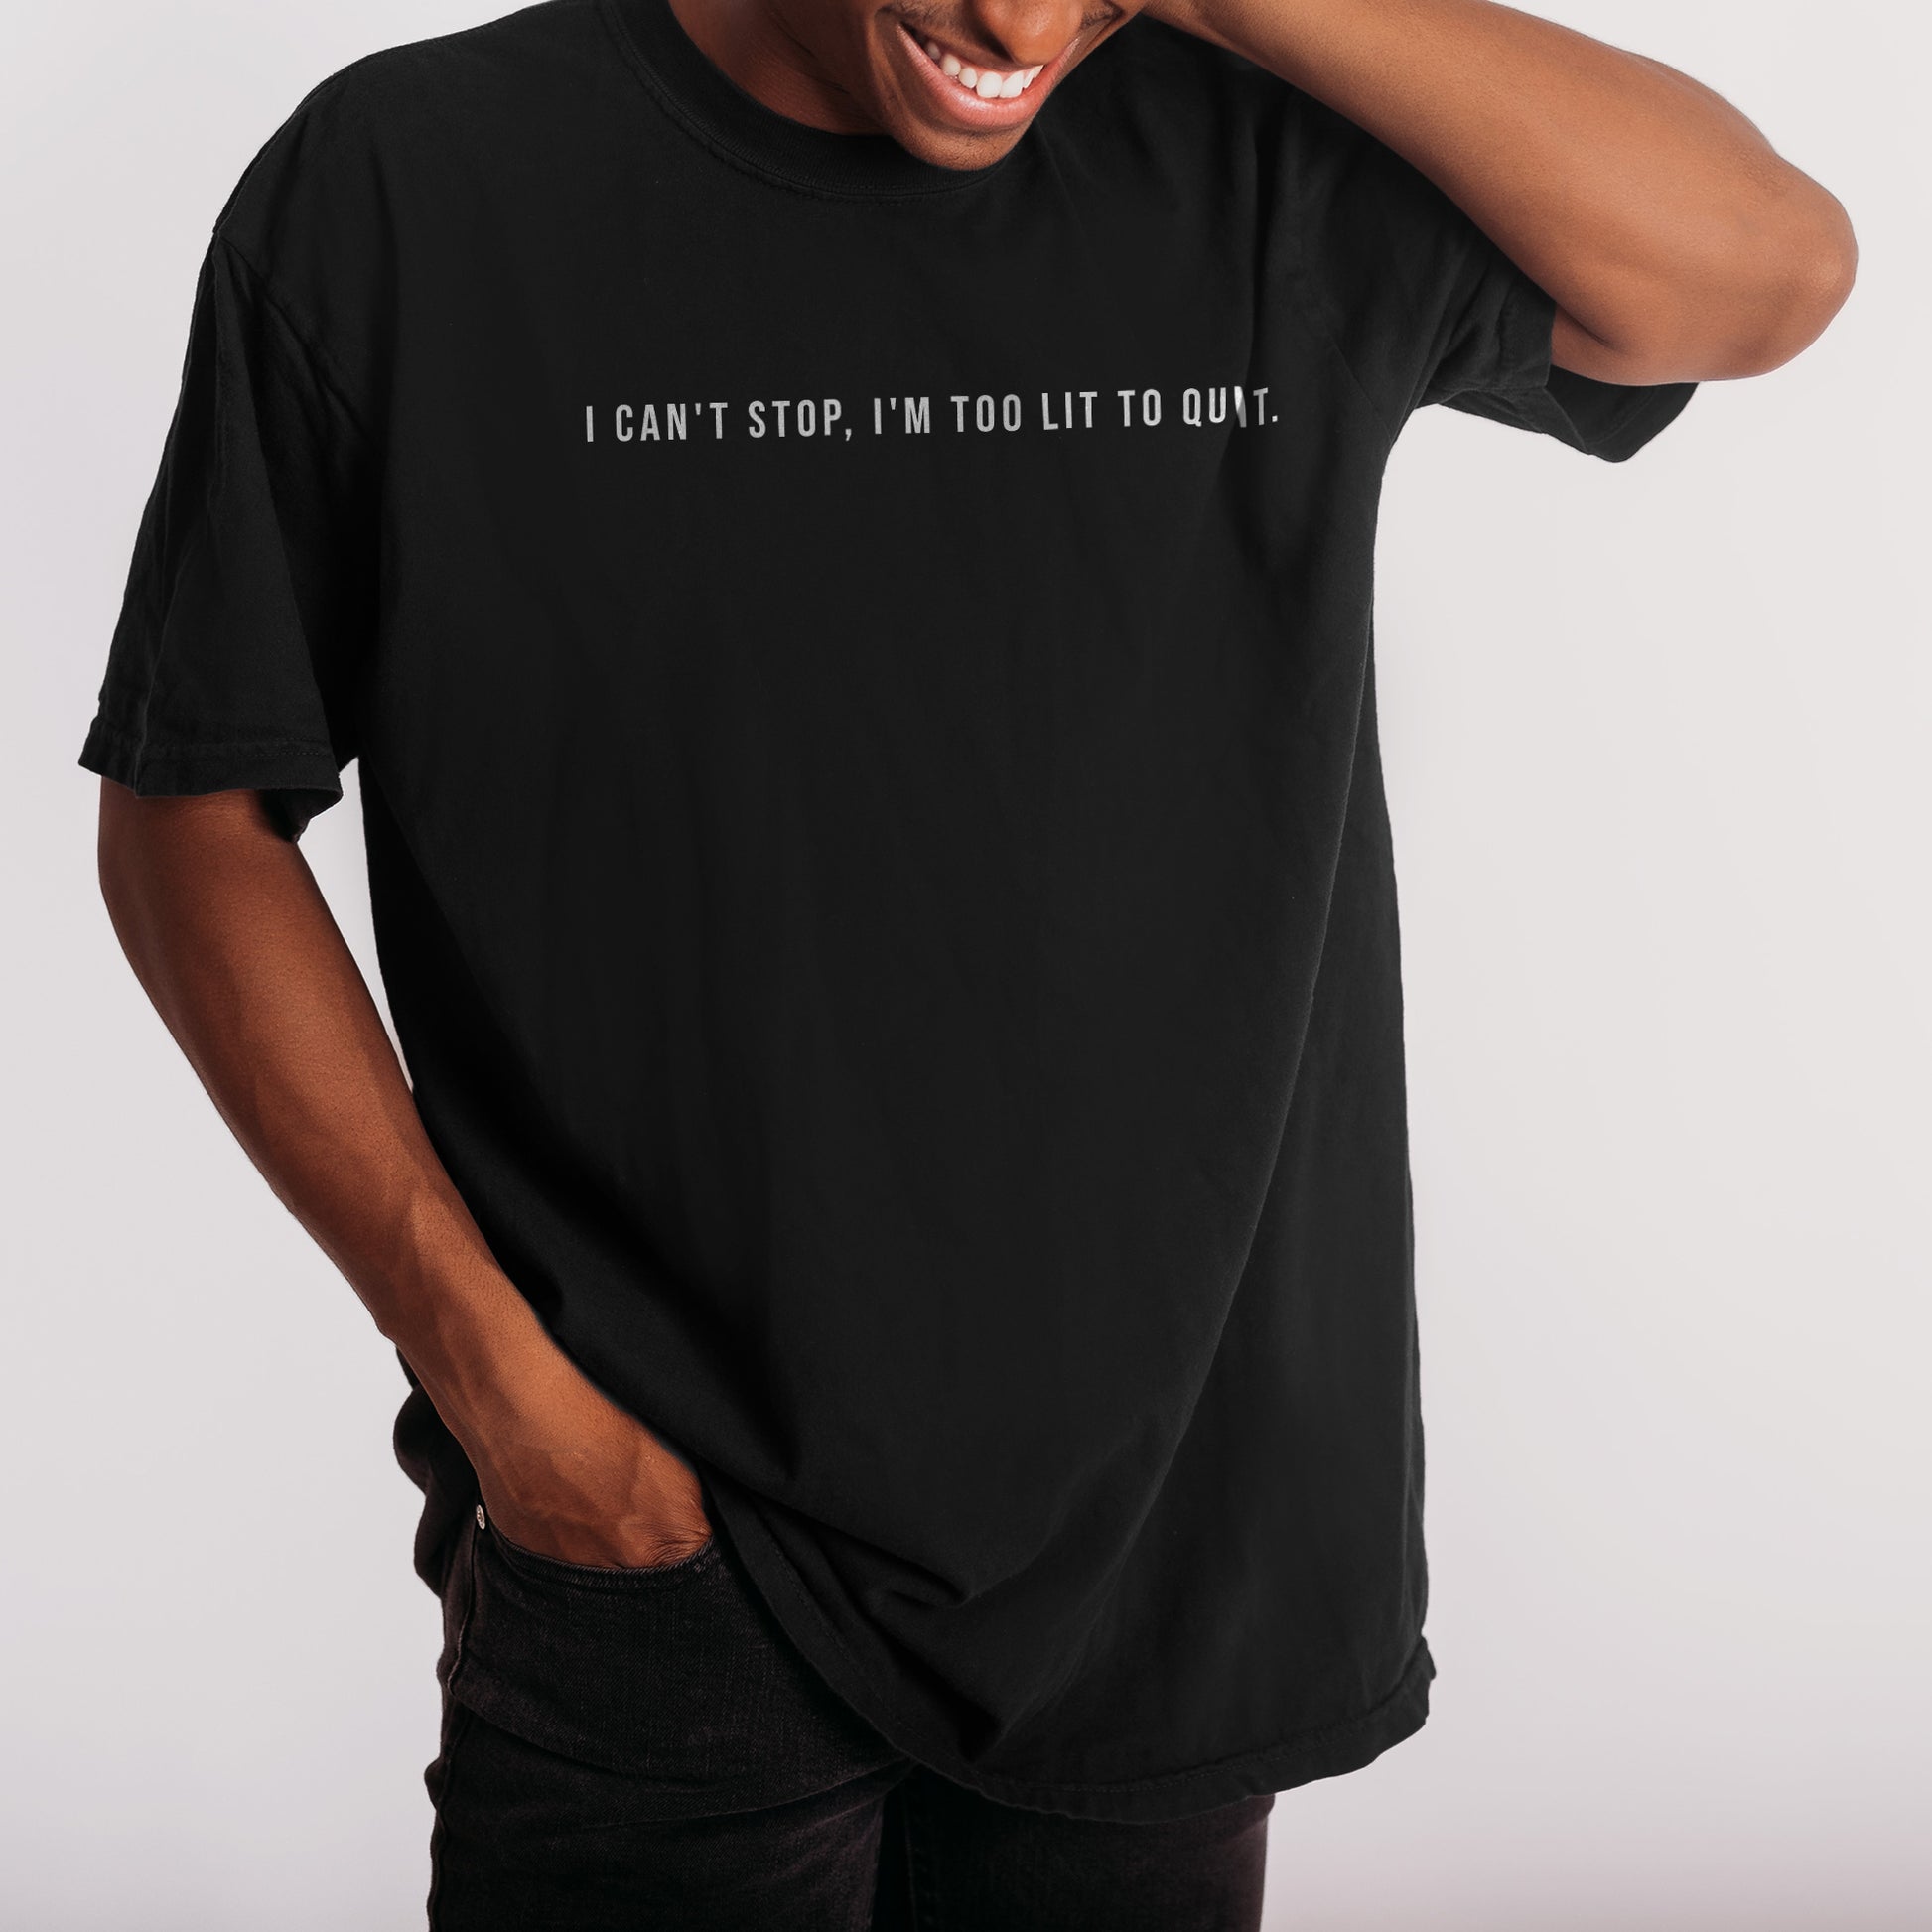 I Can't Stop, I'm Too Lit to Quit Boyfriend Crew Tee Solid Black Closeup Artwork and Texture